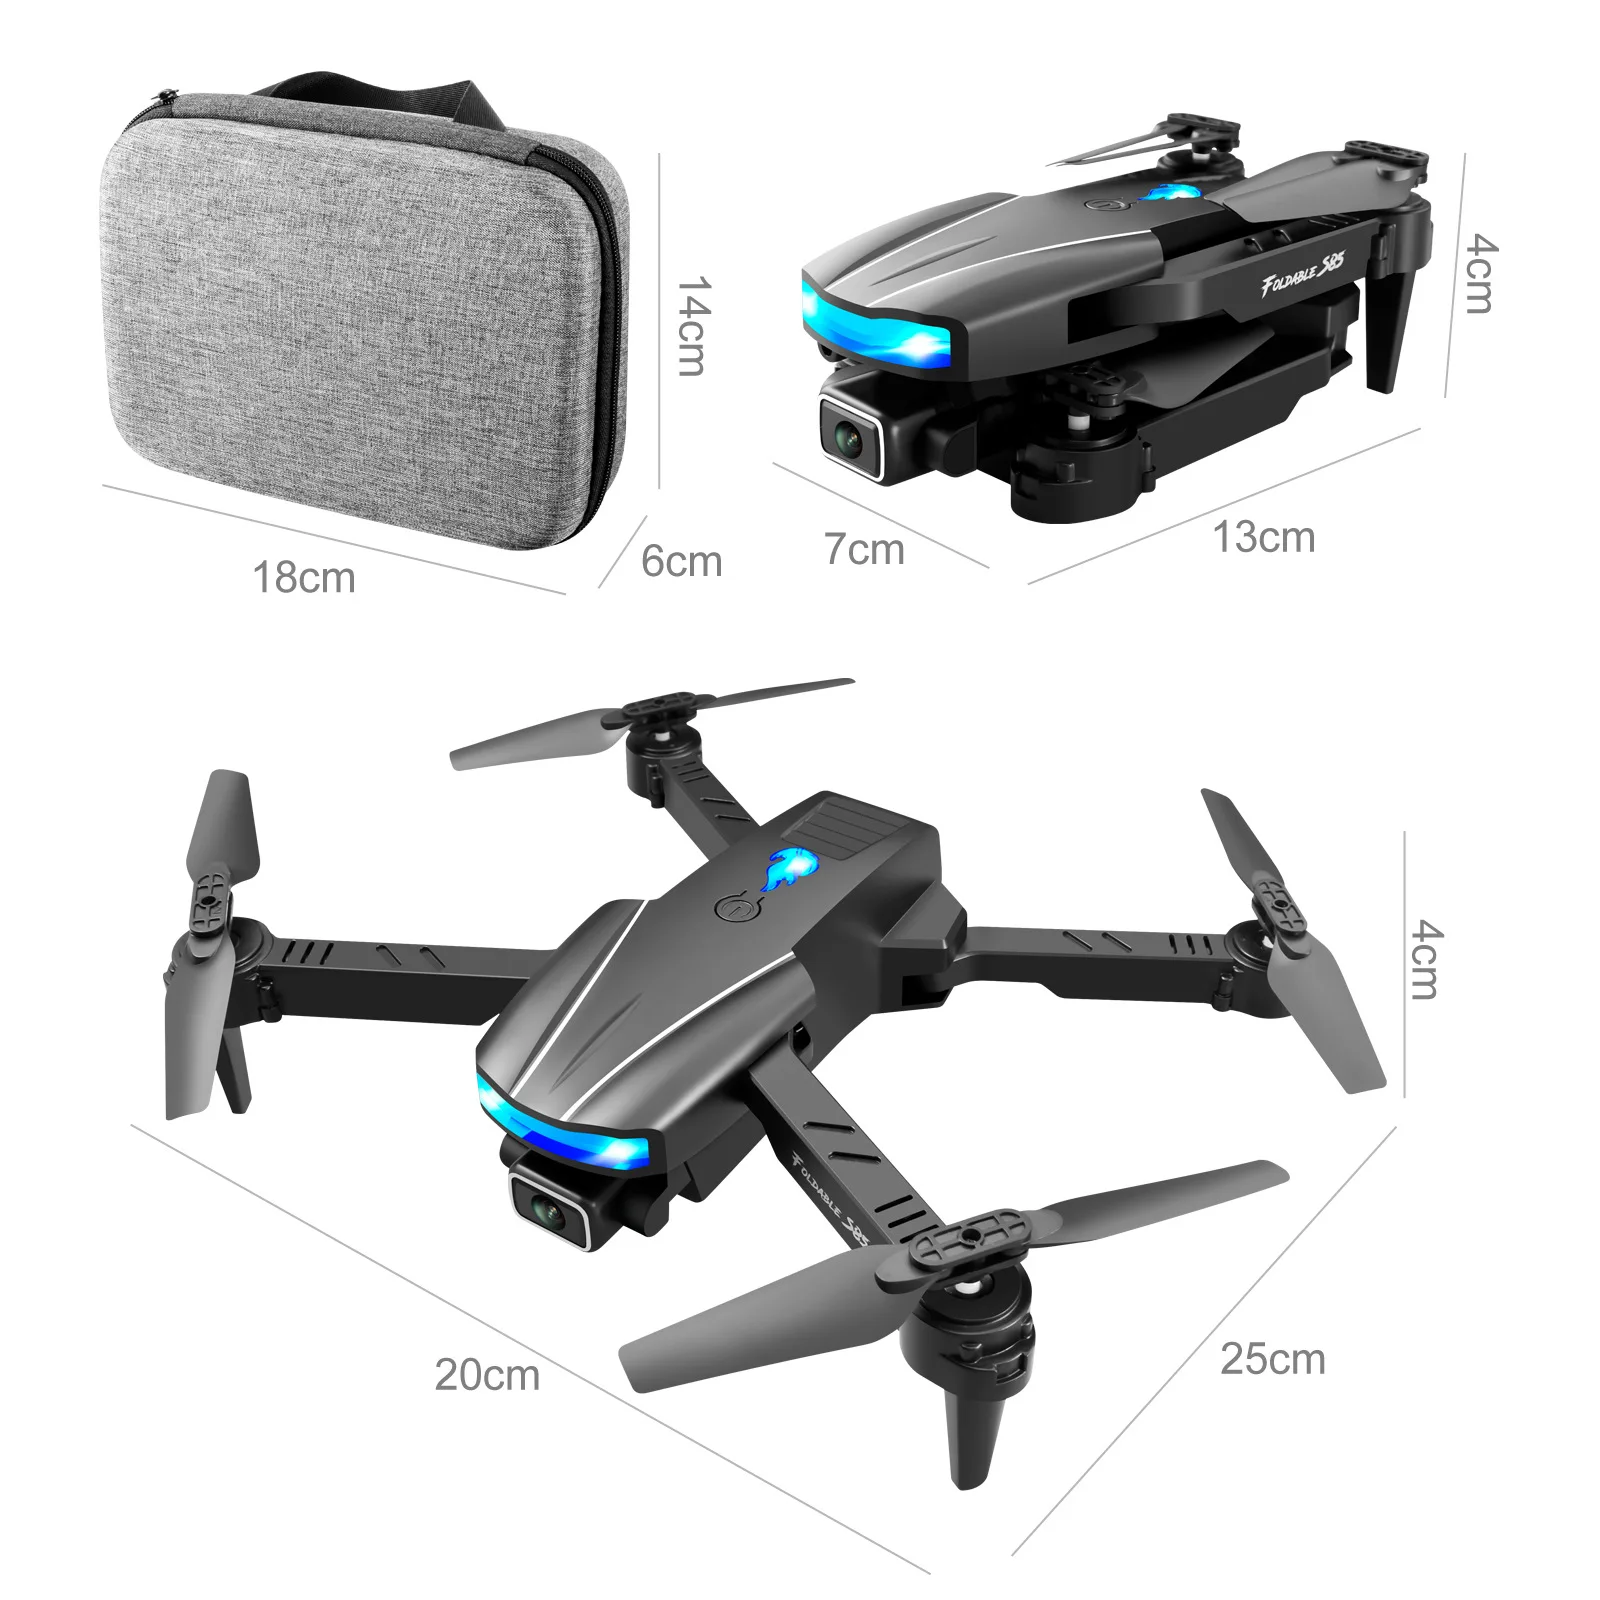 

Mini Quadcopter with Camera HD Drone 4k Profesional Aerial Photography Vehicle Toy Remote Control Plane Folded Drones